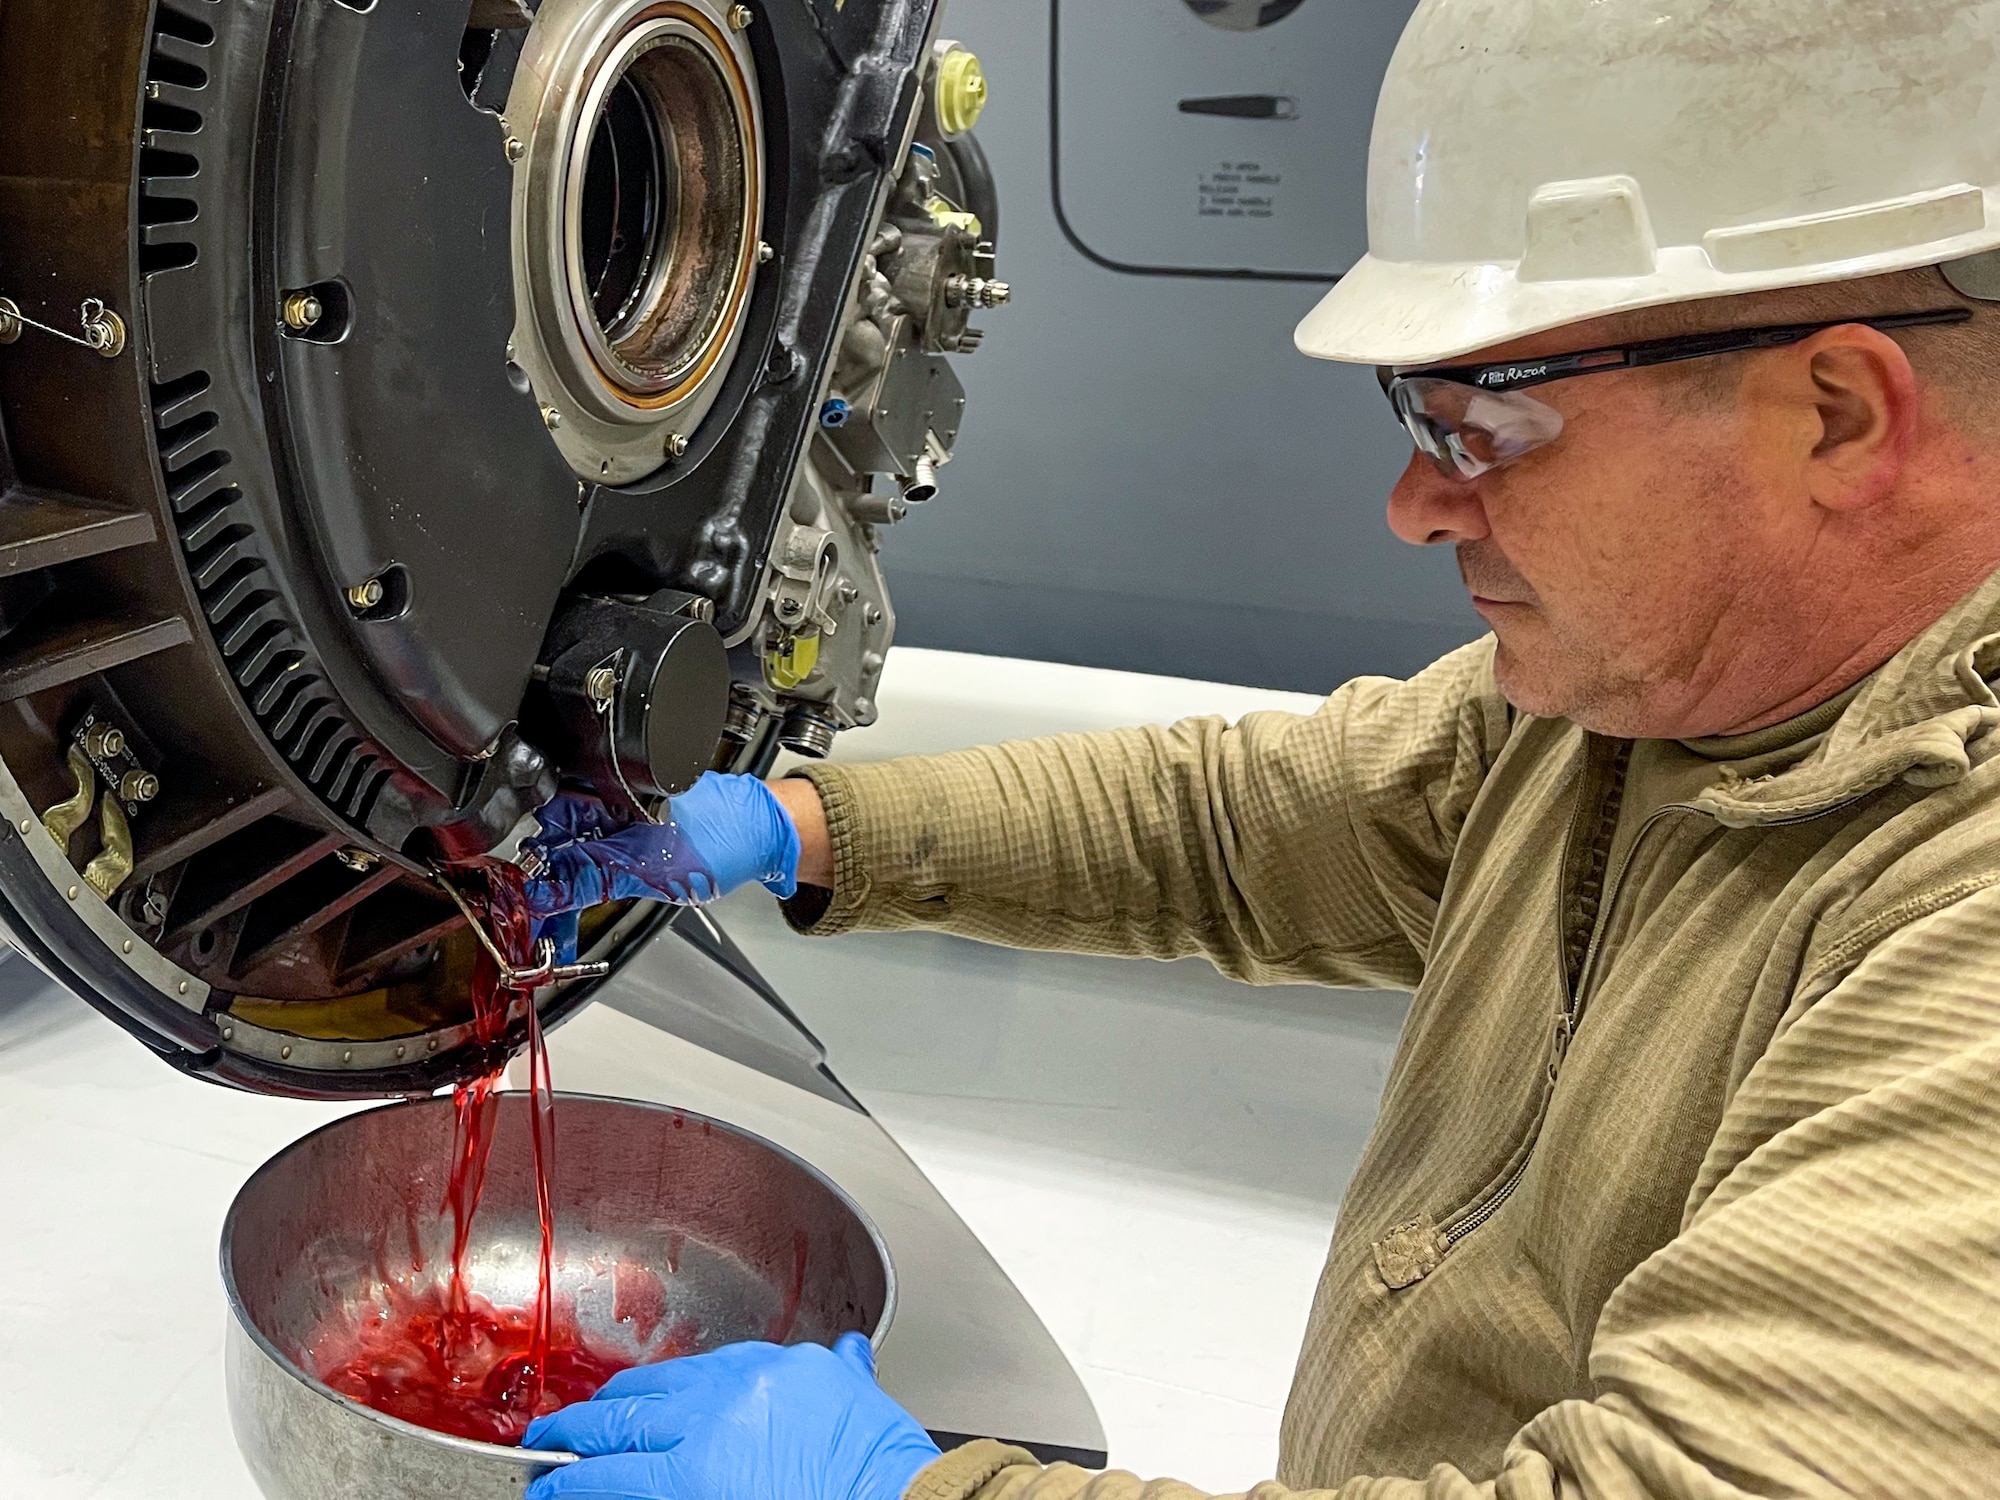 Master Sgt. Dale Cleugh, an aerospace propulsion technician with the 910th Aircraft Maintenance Squadron, drains hydraulic fluid from a C-130H Hercules propeller, Jan. 11, 2023, at Mountain Home Air Force Base, Idaho.